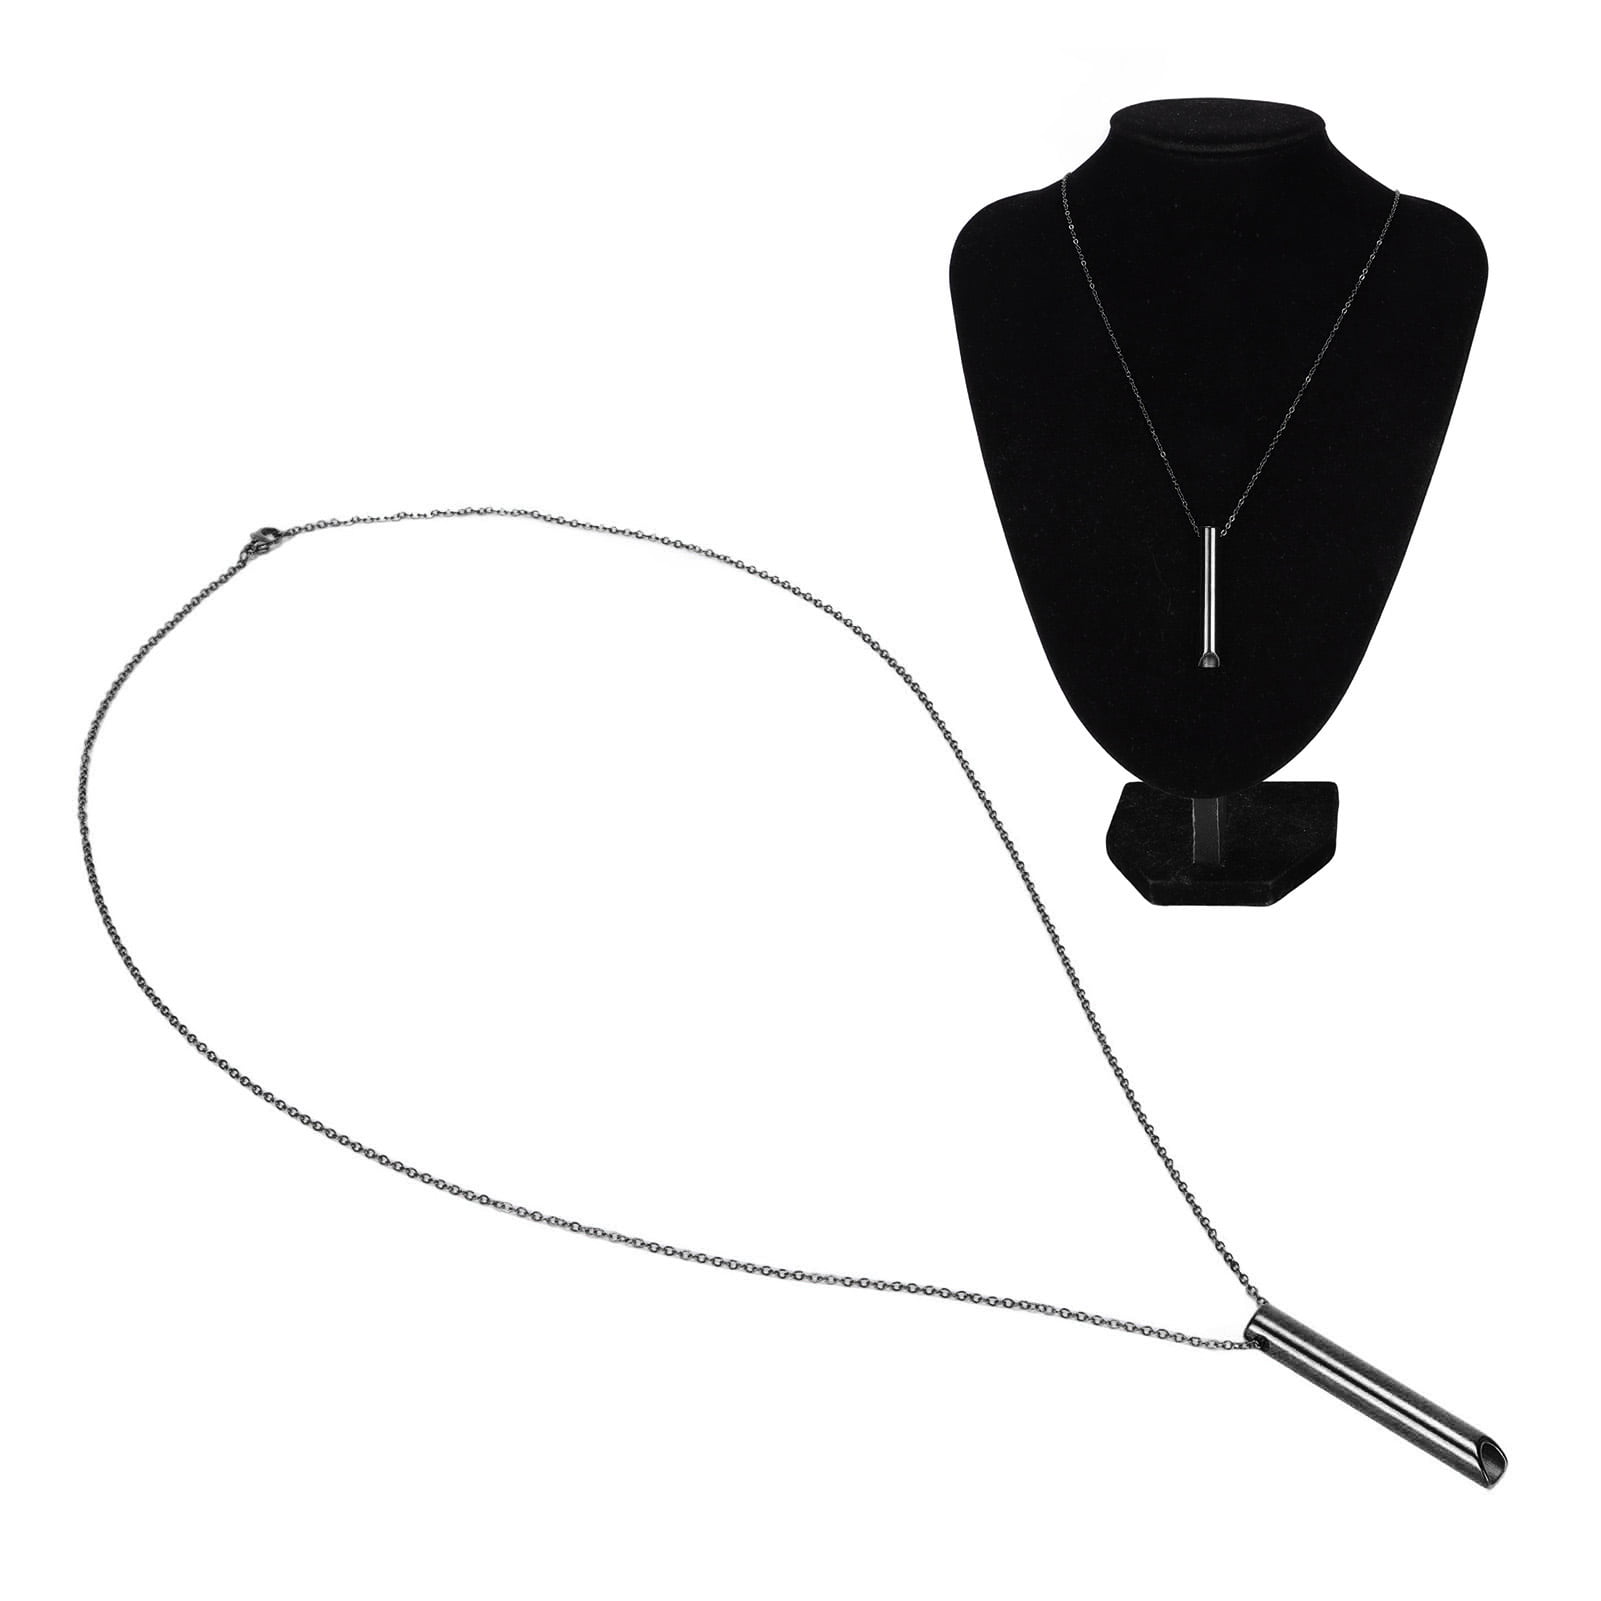 INSYOHO Anxiety Relief Items, Anxiety Necklace, Breathing Necklace for  Anxiety Relief Breathing Exercise Device for Meditation, The Shift Necklace  for Anxiety, Stress, Panic Attack Relief…, Stainless price in Saudi Arabia